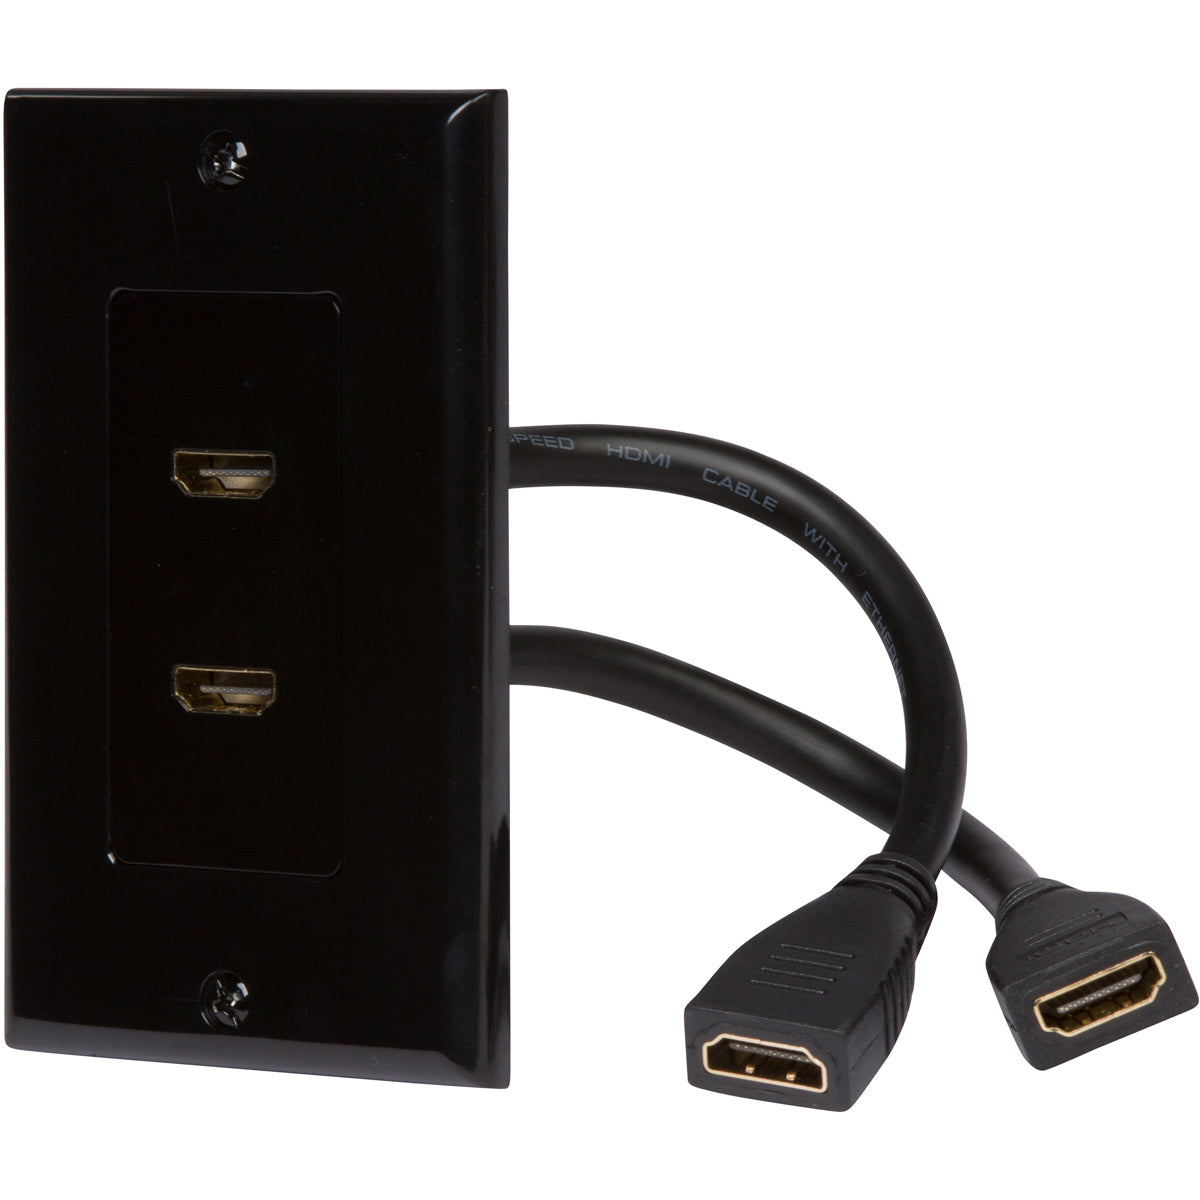 HDMI Wall Plate [UL Listed] (2 Port) Insert with 6-Inch Built-In Flexible Hi-Speed HDMI Cable (Black) - Milena International Inc